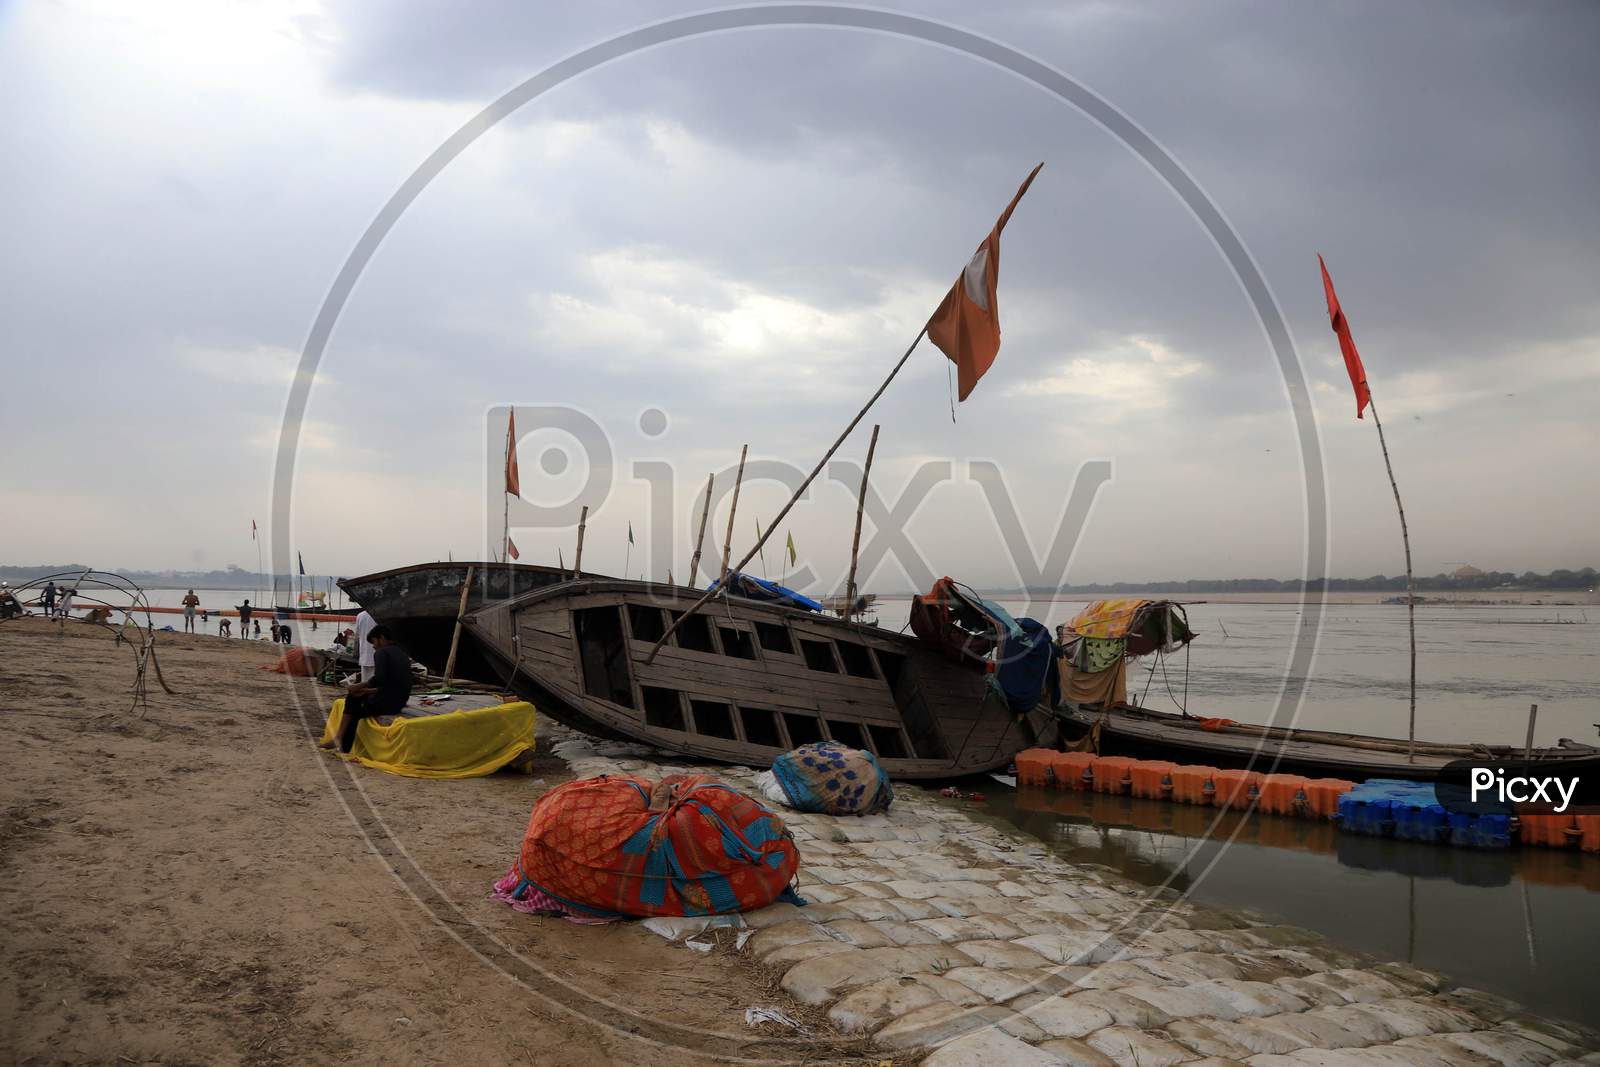 A View Of Clean Water Of Sangam, Confluence Of Three Water Of Ganga Yamuna And Mythical Saraswati During A 21-Day Nationwide Lockdown To Slow The Spreading Of Coronavirus Disease (Covid-19) In Prayagraj, April 9, 2020.